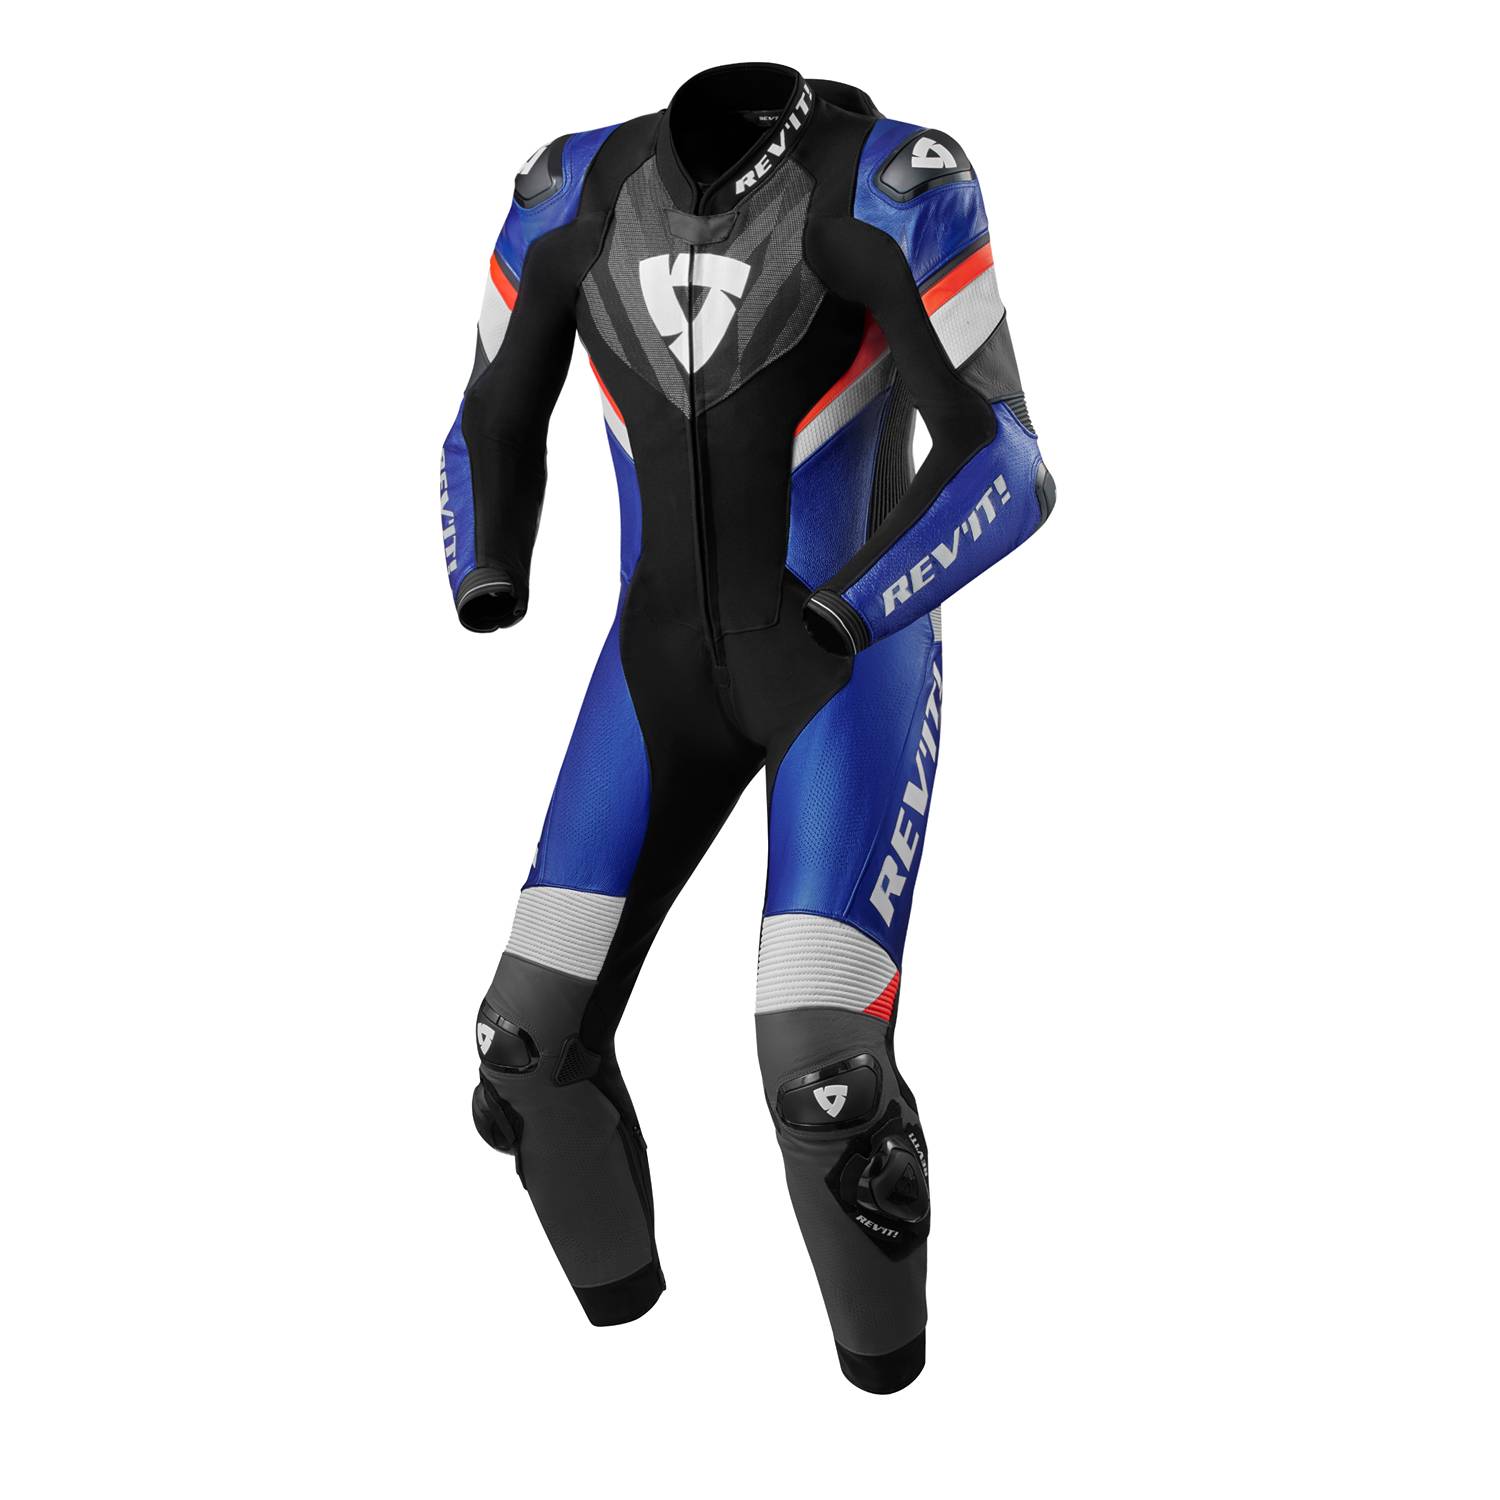 Image of REV'IT! Hyperspeed 2 One Piece Suit Black Blue Size 46 ID 8700001359719